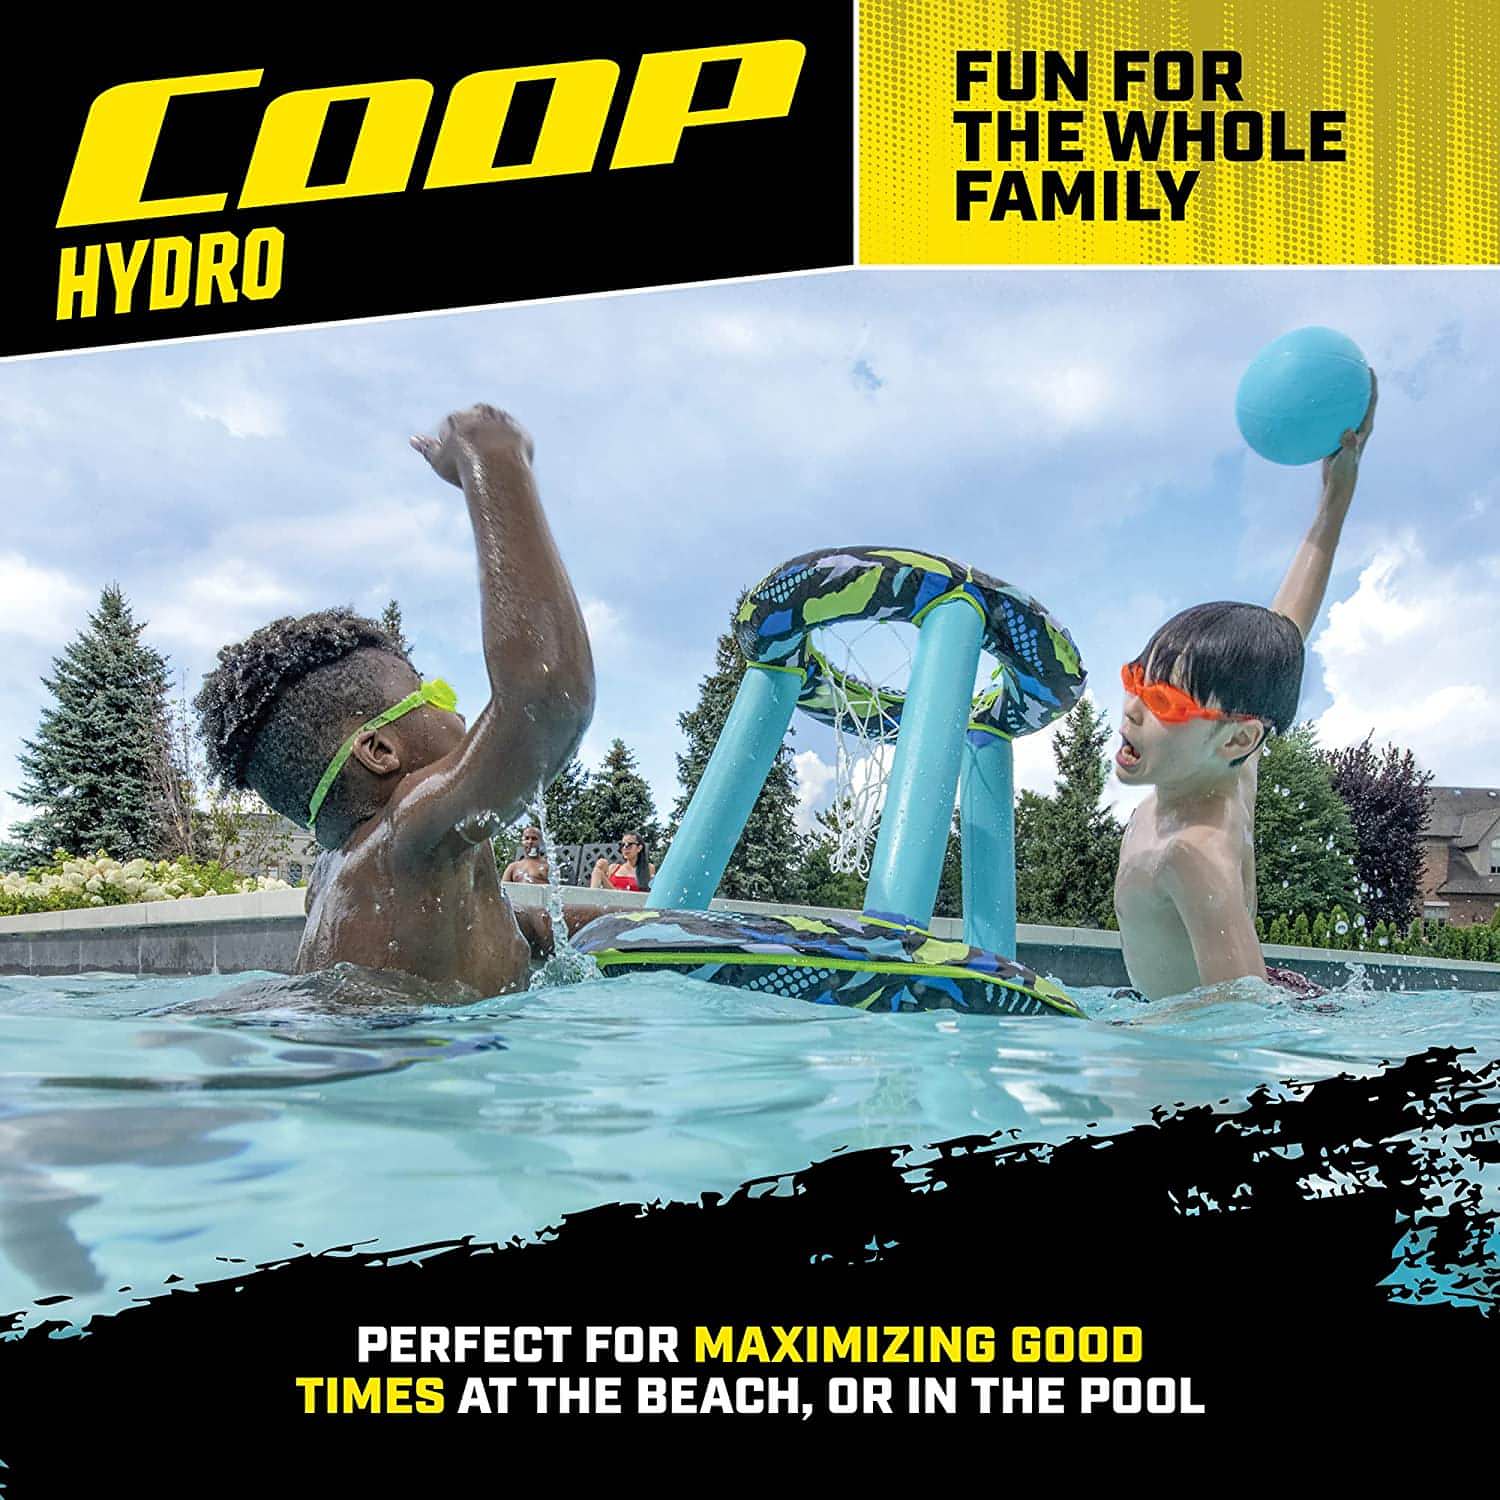 Coop Hydro Spring Hoops (Blue Camo) - Brandat Outlet